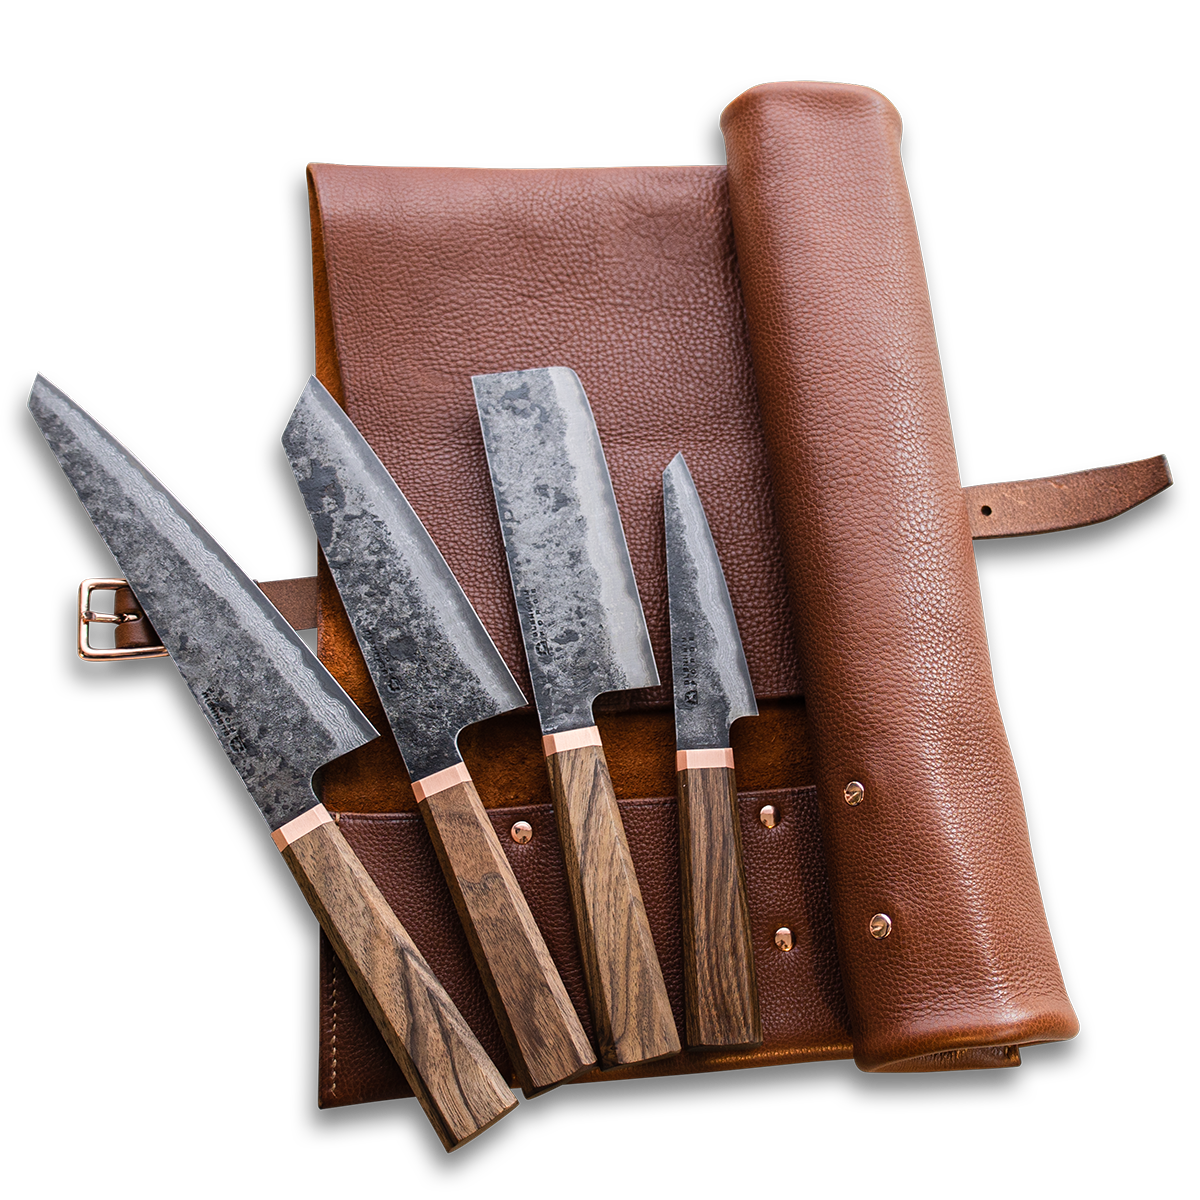 Craft Knife, Exacto Knife Set 20 Blades for Hand Account for